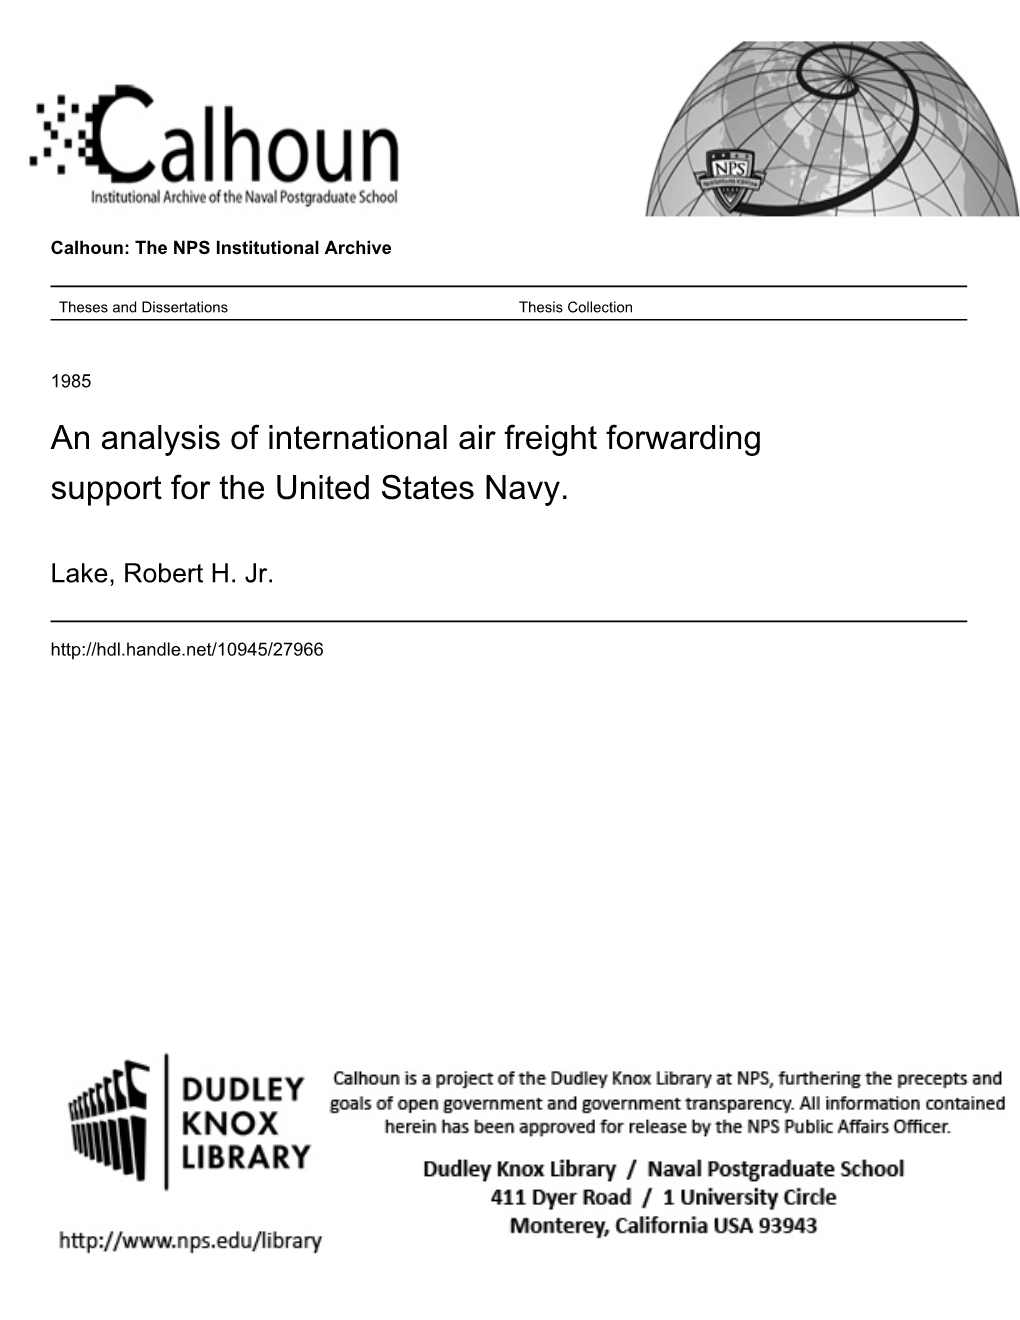 An Analysis of International Air Freight Forwarding Support for the United States Navy